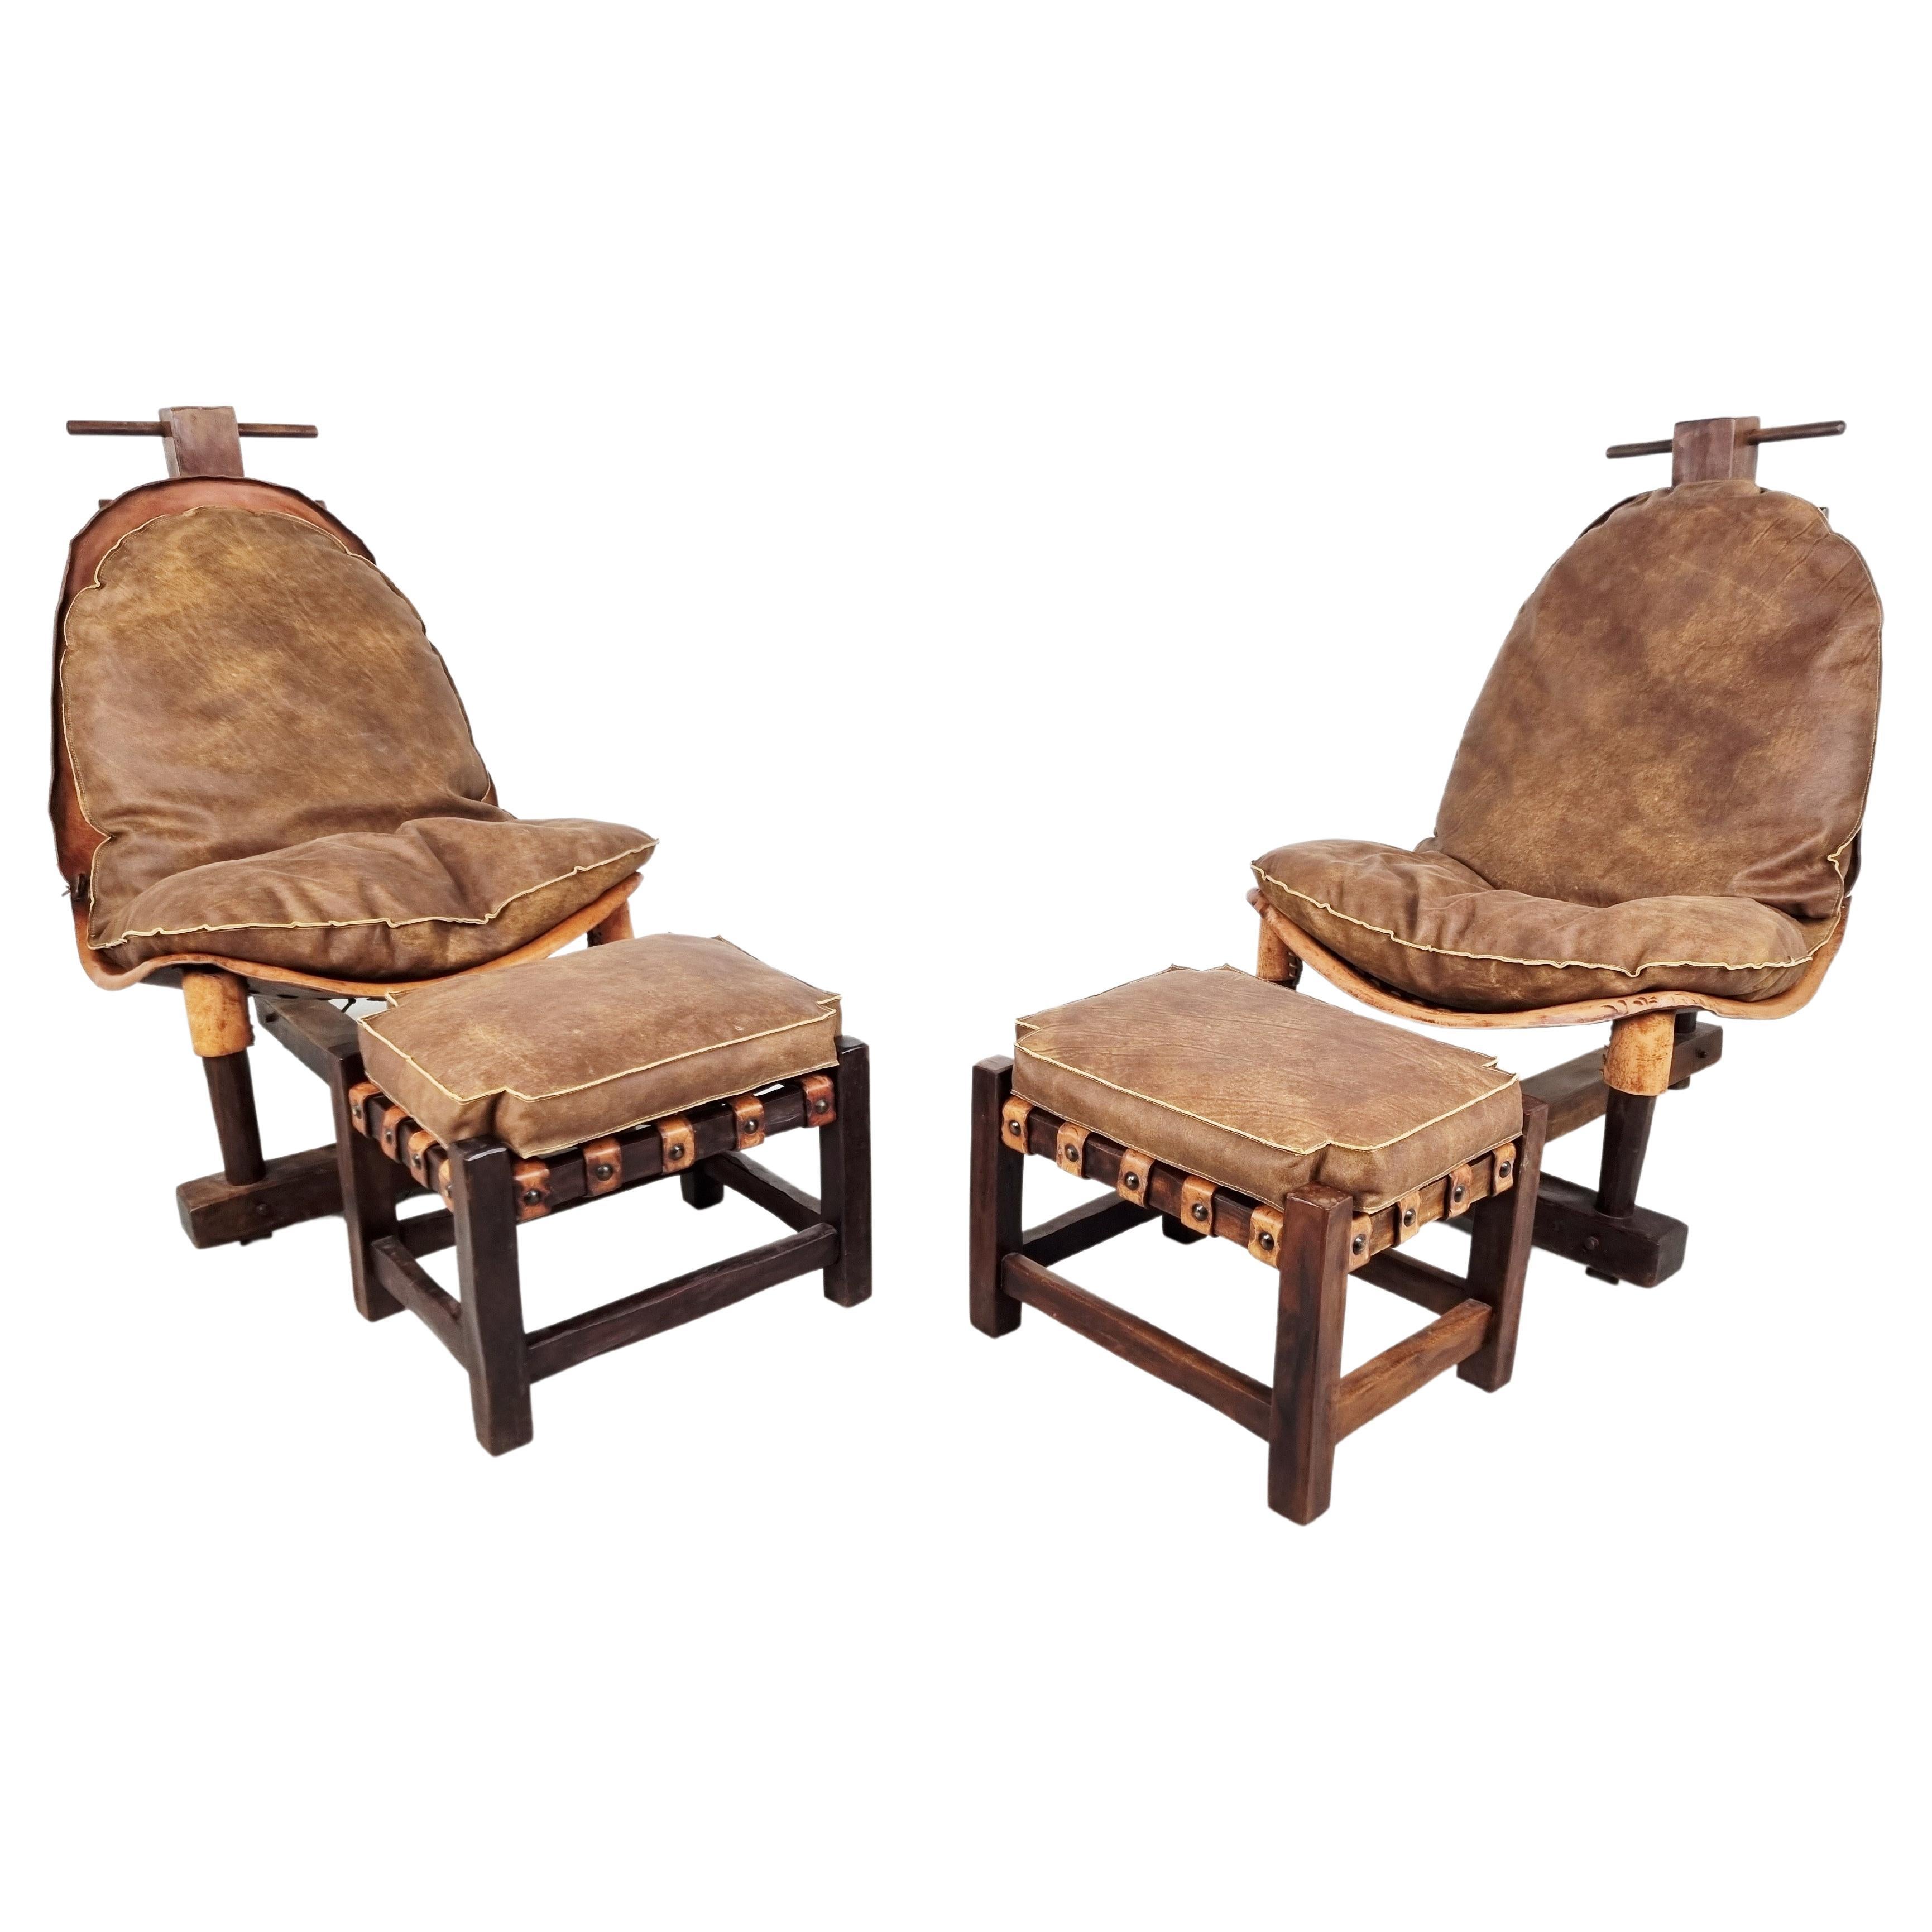 Vintage Brazilian Lounge Chairs, 1960s Set of 2 For Sale